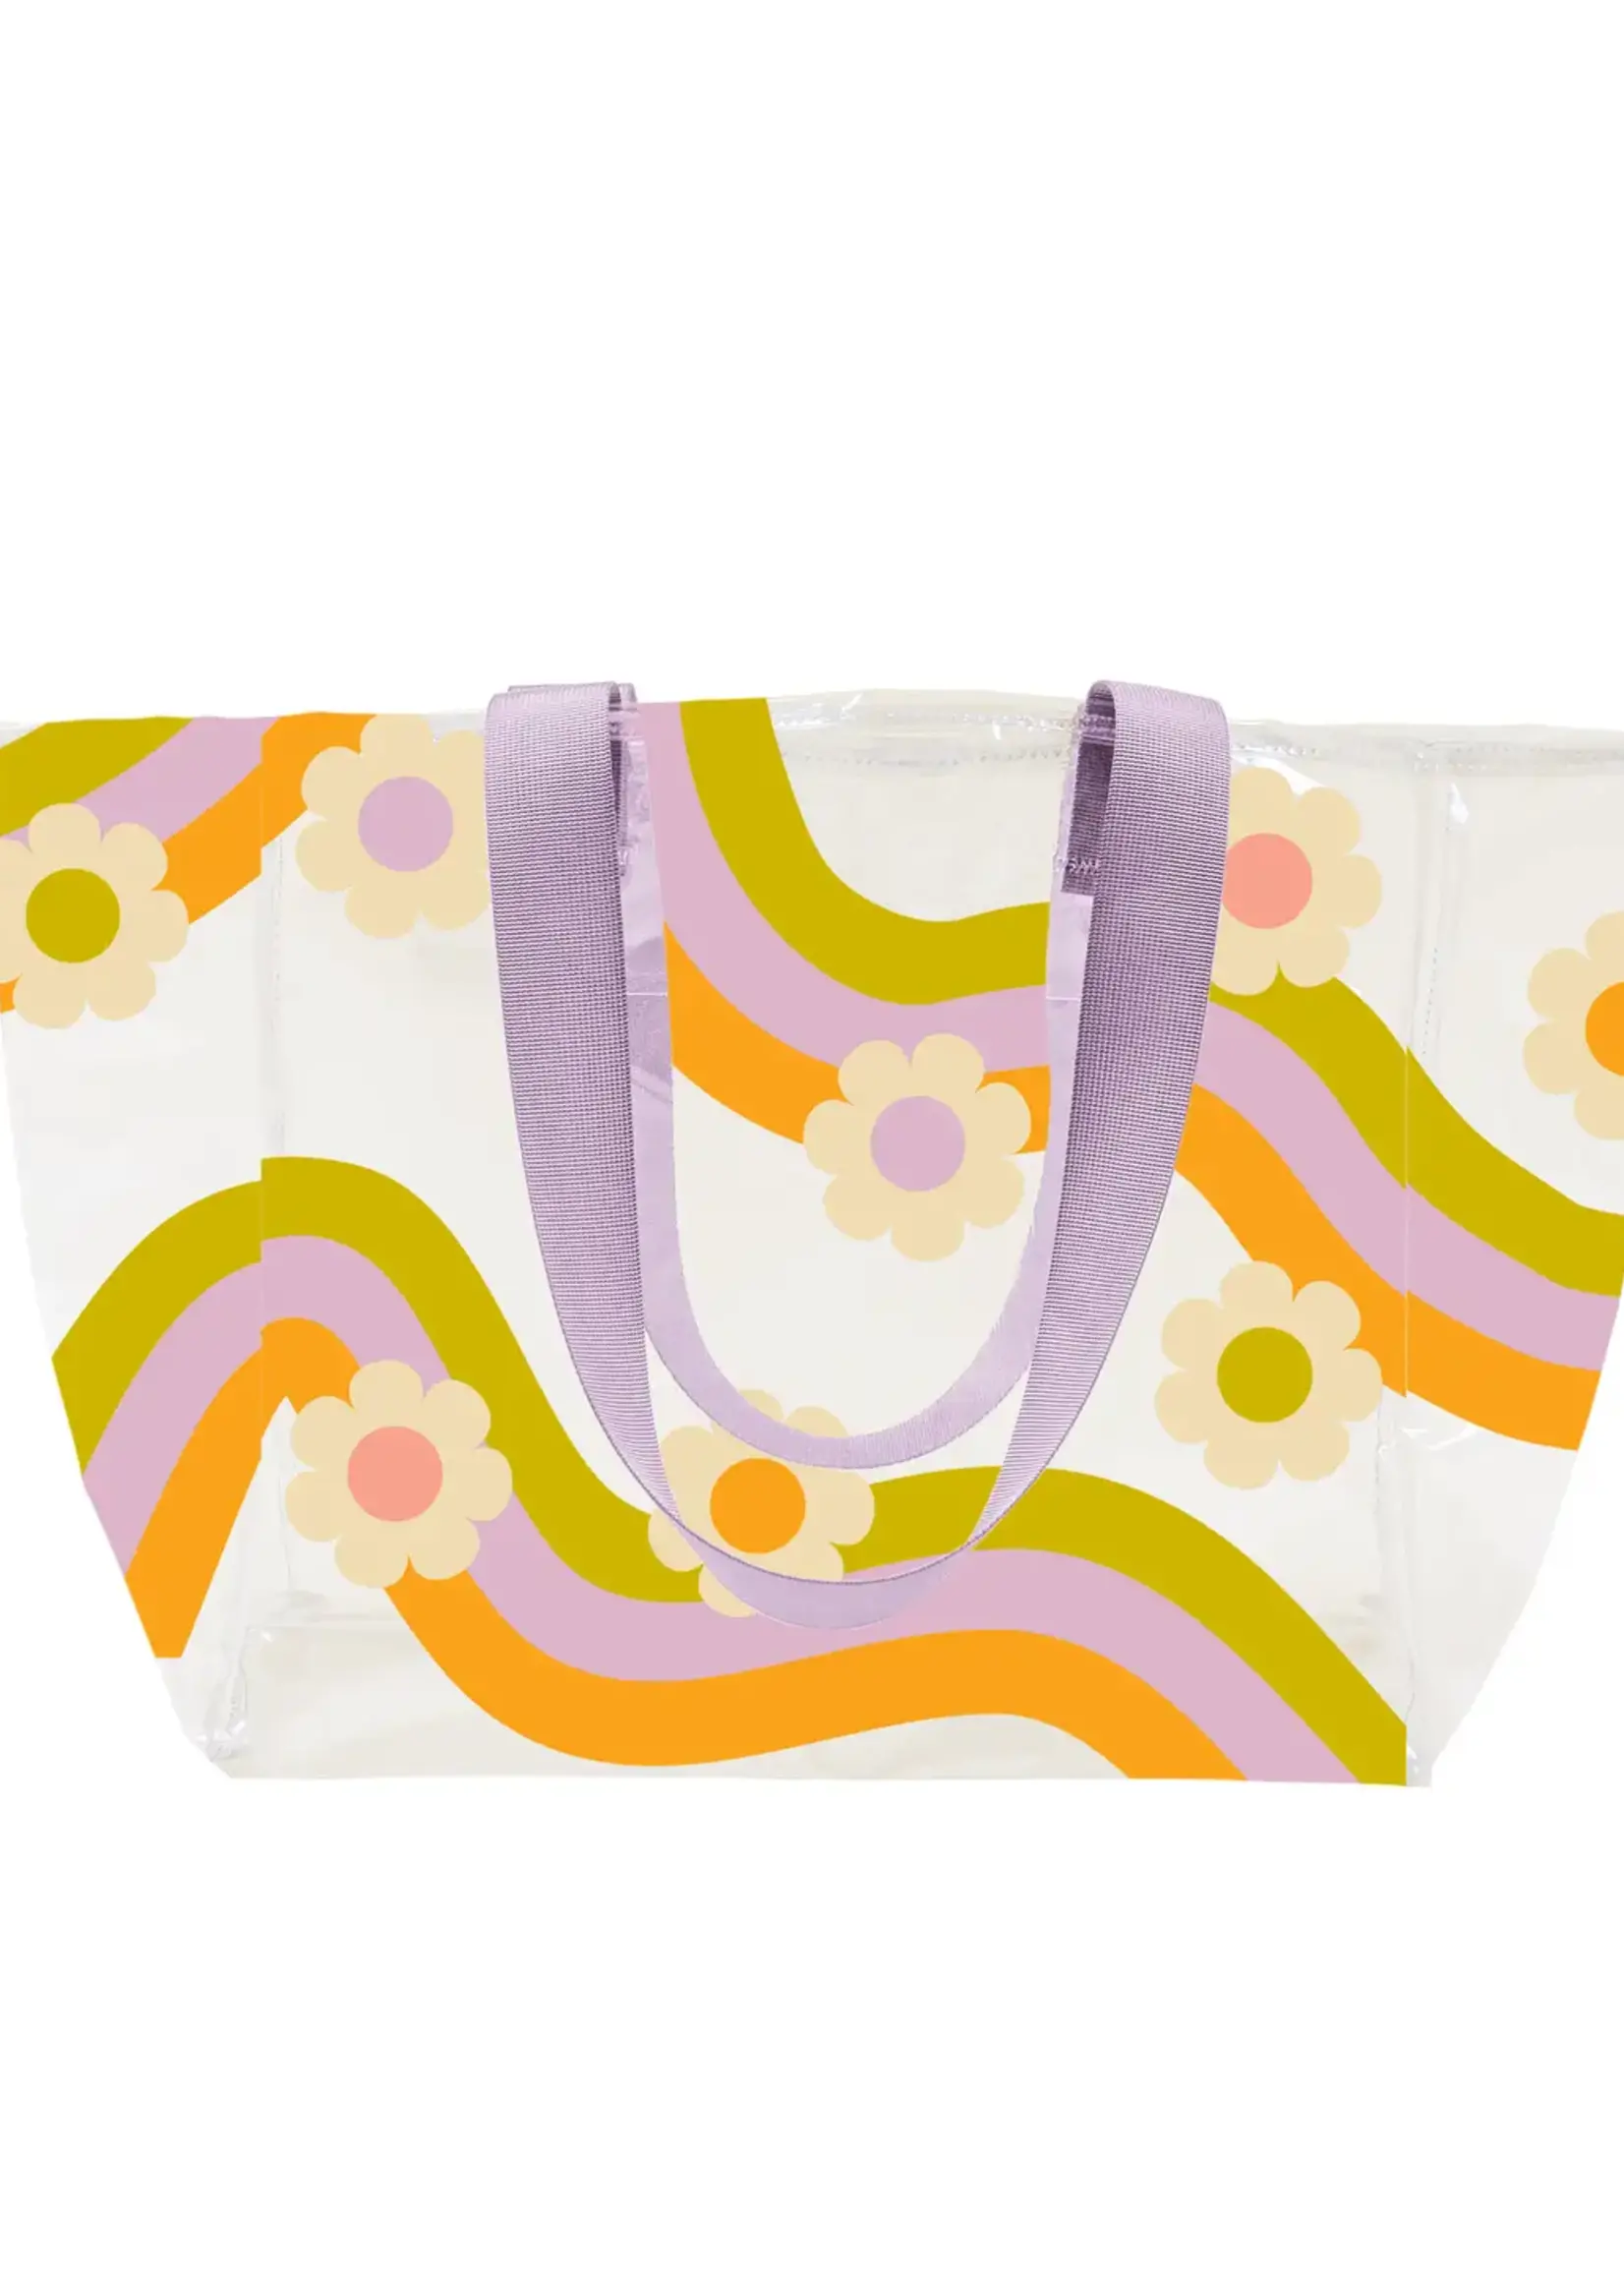 Talking Out of Turn Wavy Daisy Medium All Day Tote